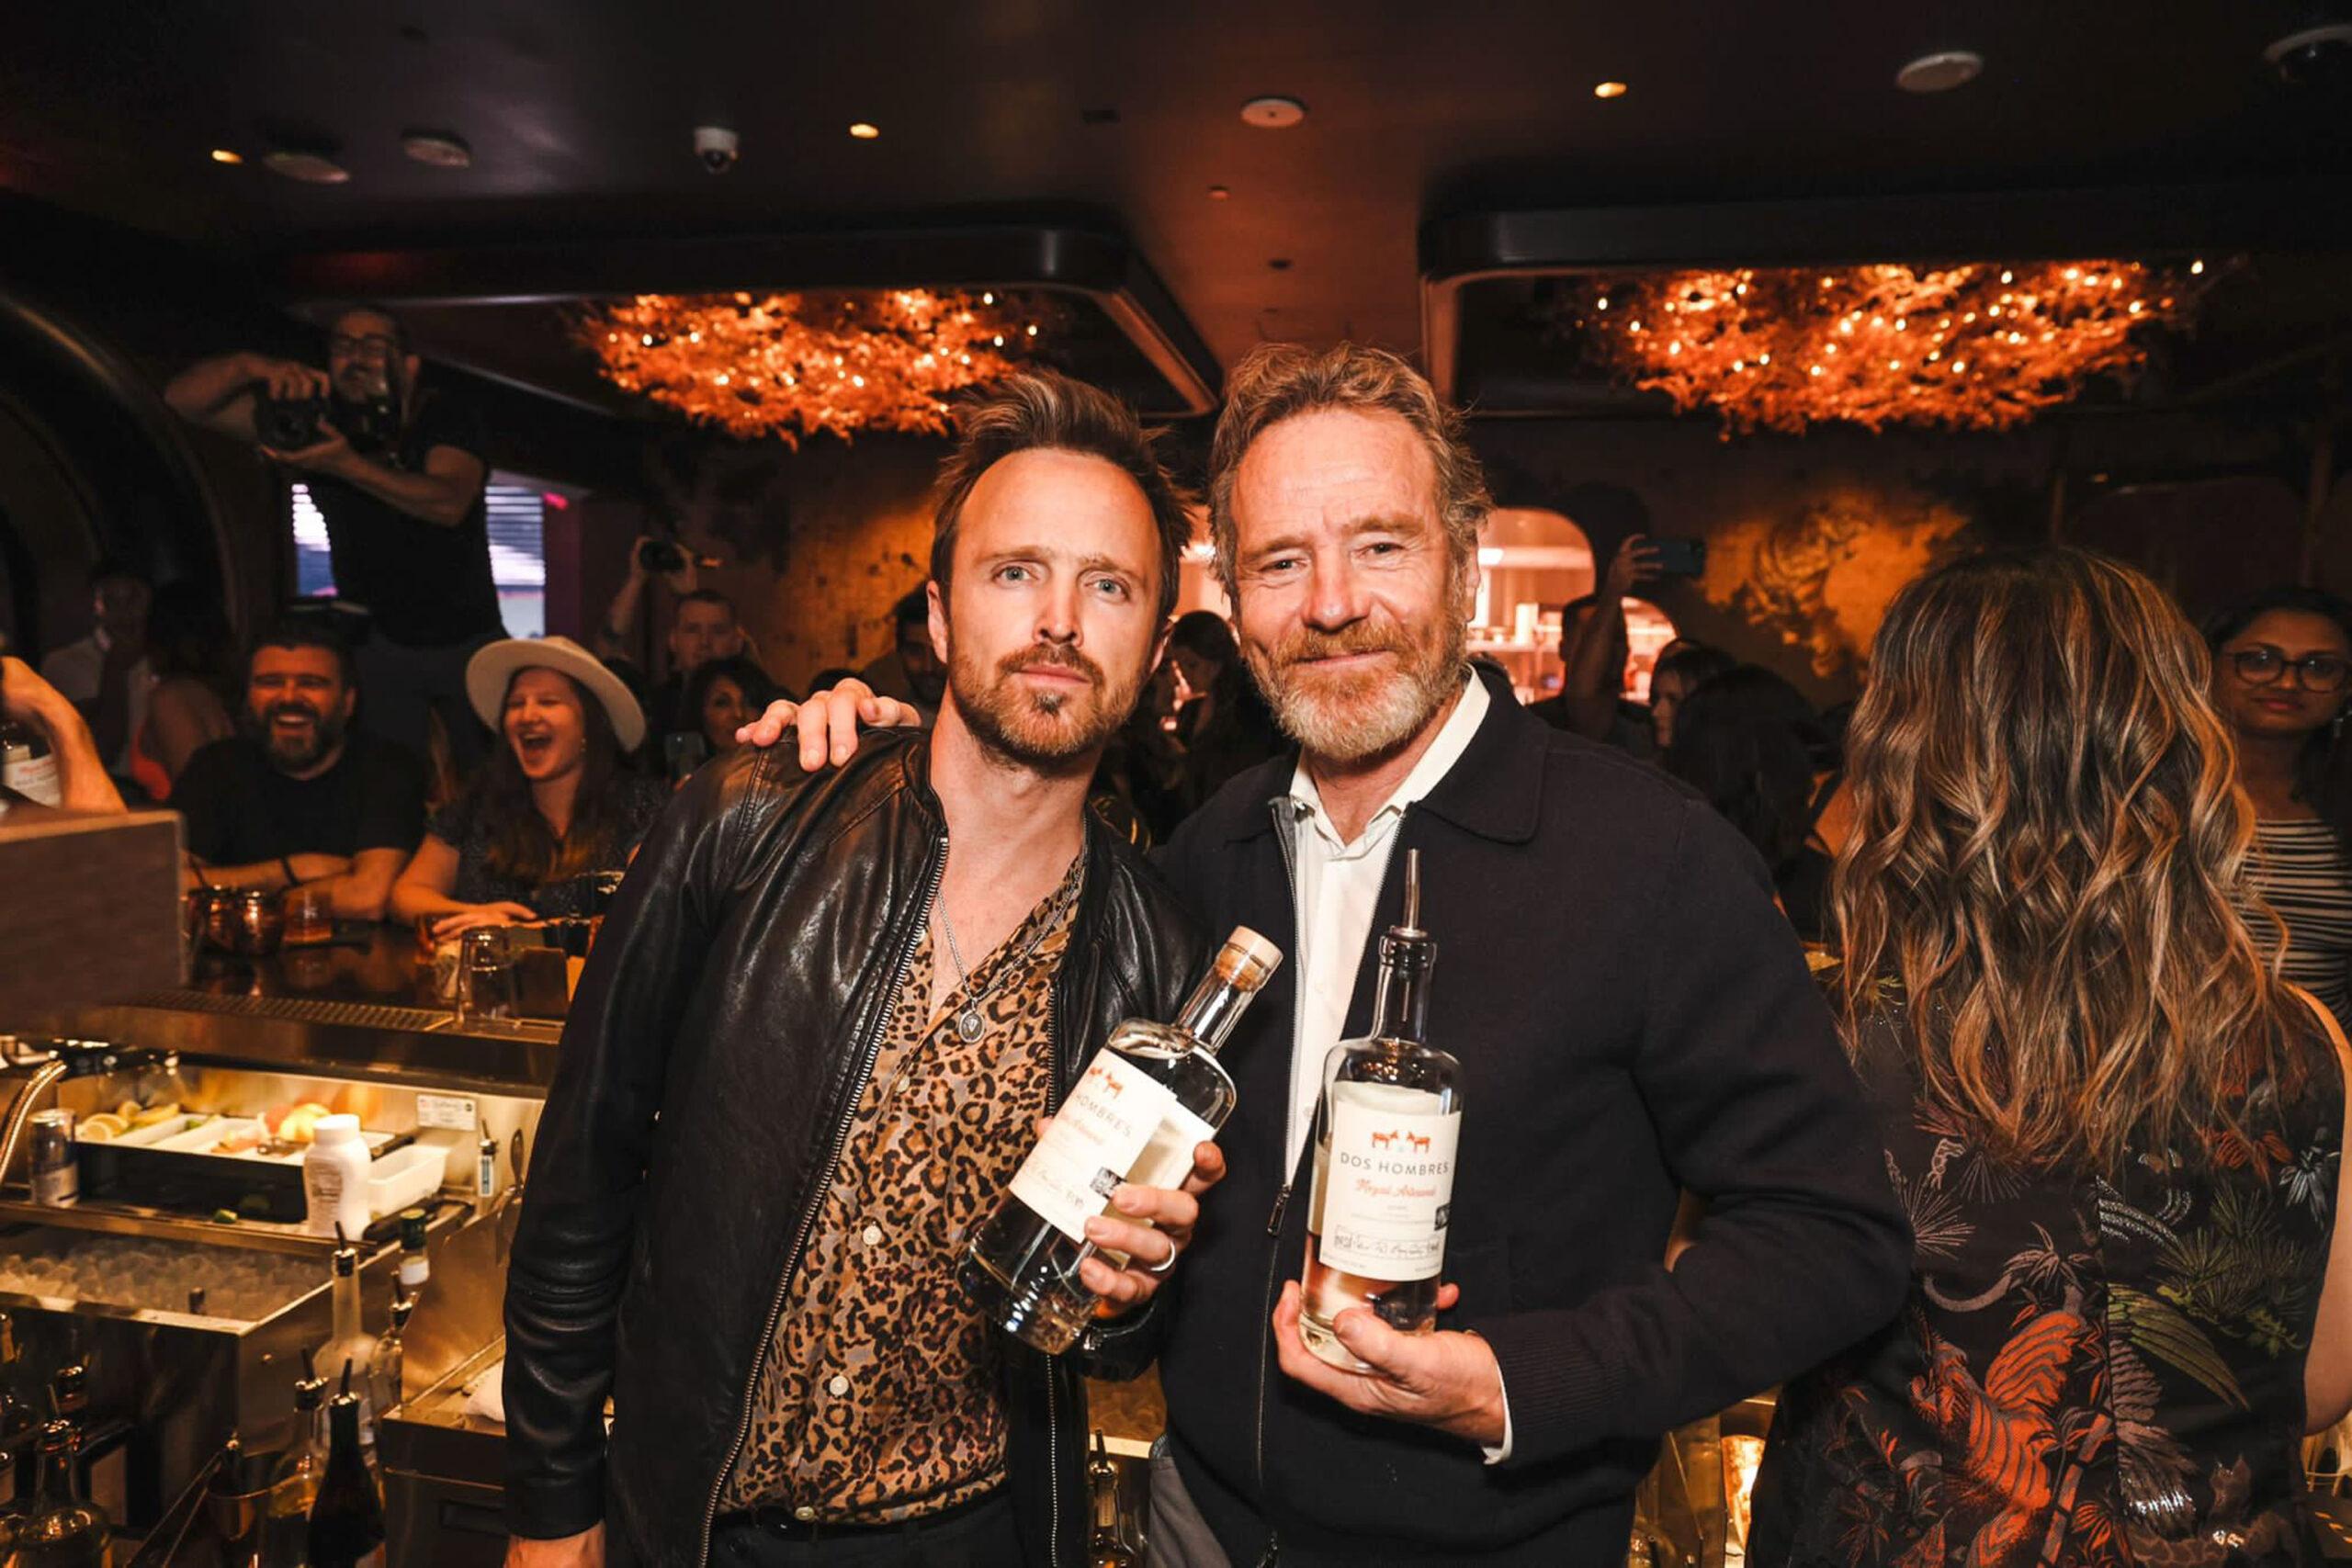 Breaking Bad duo Aaron Paul and Bryan Cranston mix cocktails with their Dos Hombres Mezcal at Resorts World Las Vegas